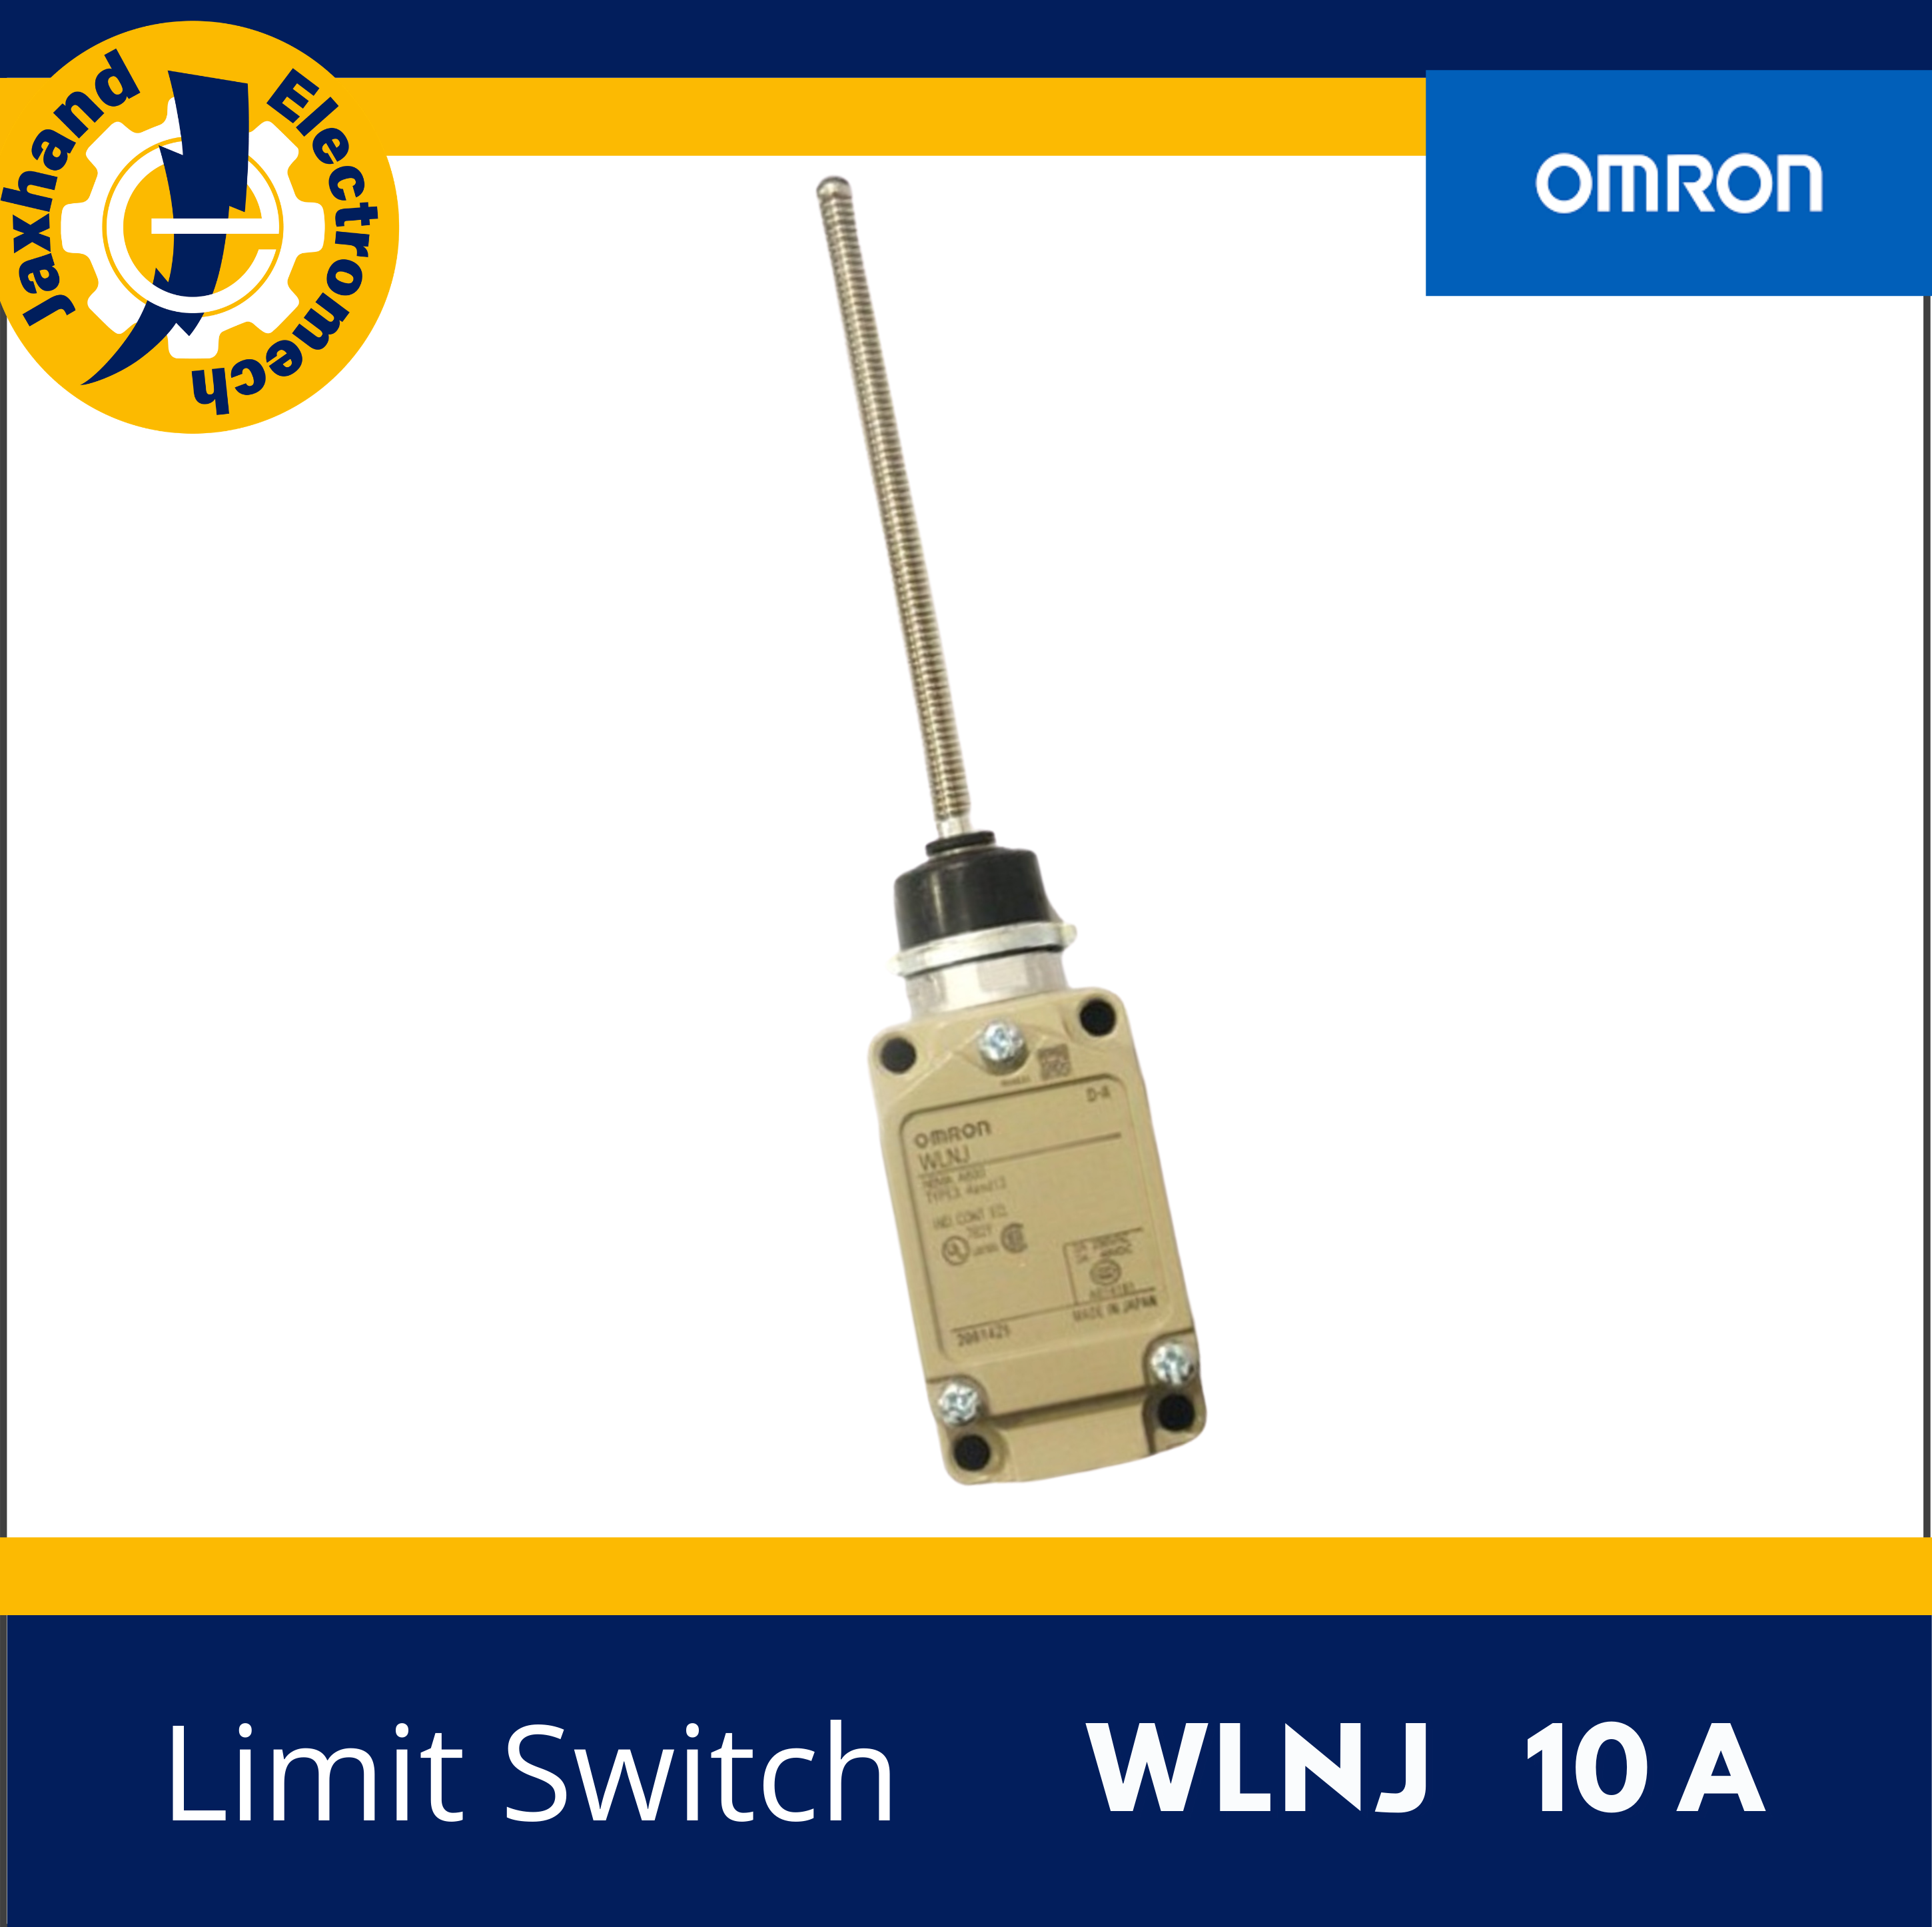 WLNJ-S2 Wobble Coil Spring Lever Momentary Limit Switch 380V 10A Free Shipping 